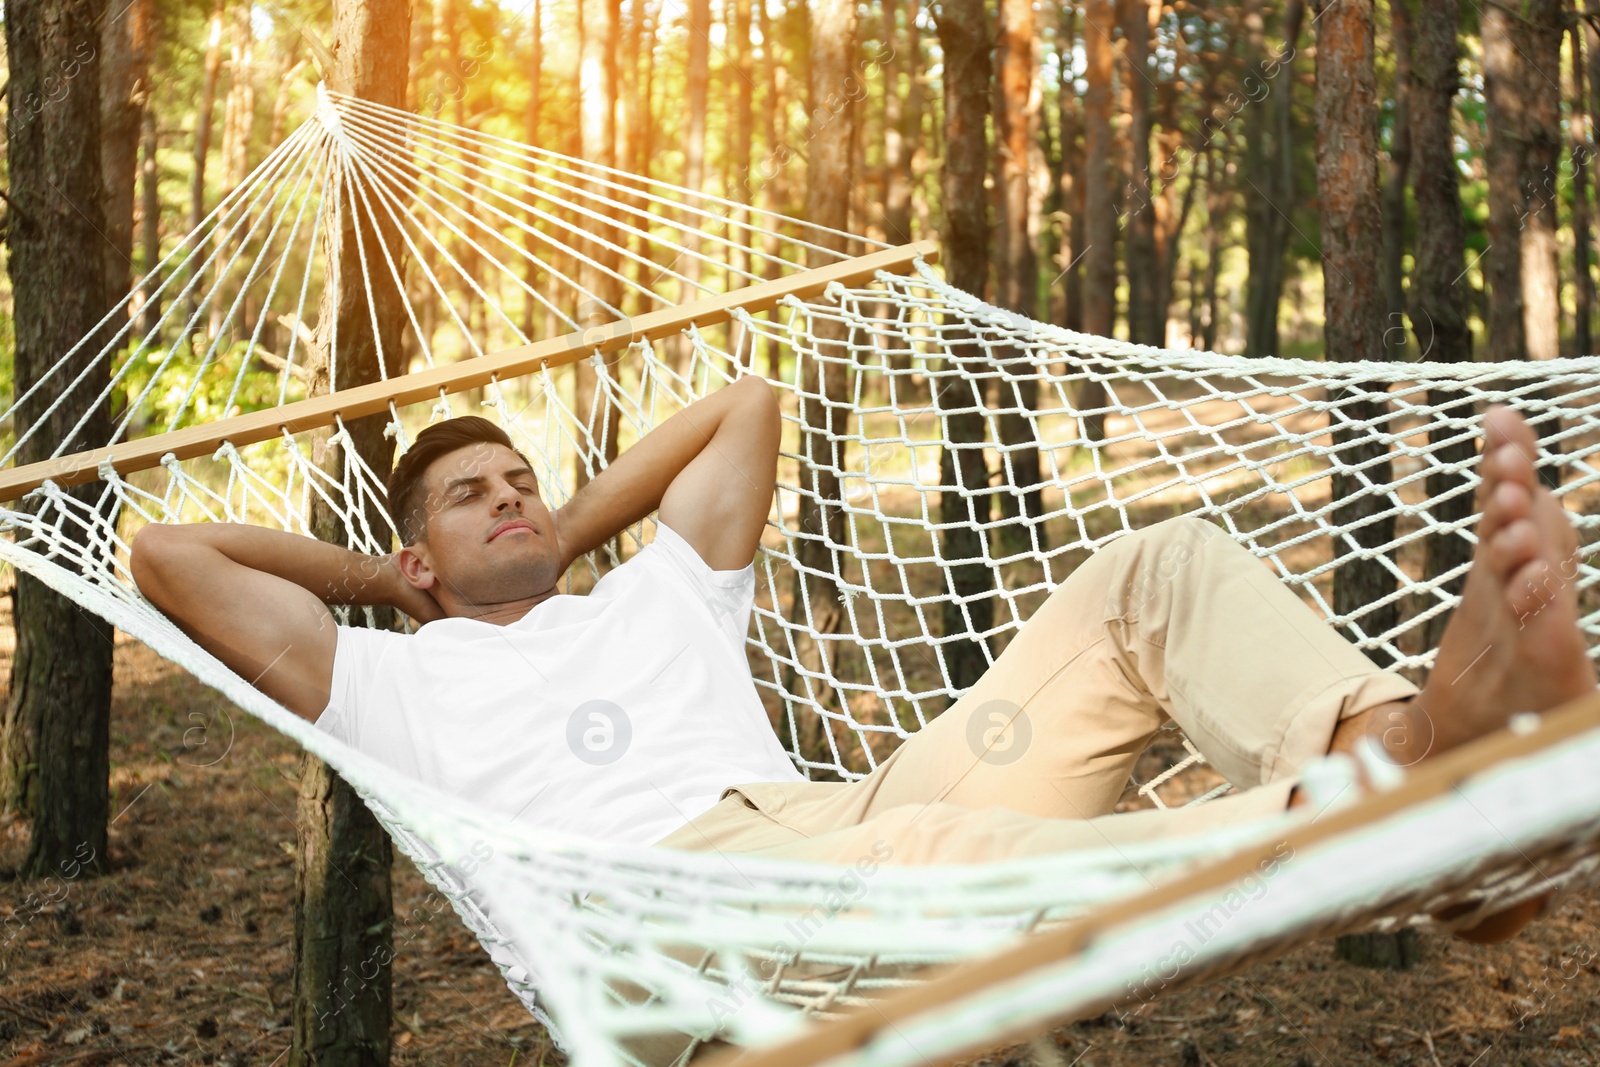 Photo of Handsome man resting in hammock outdoors on summer day